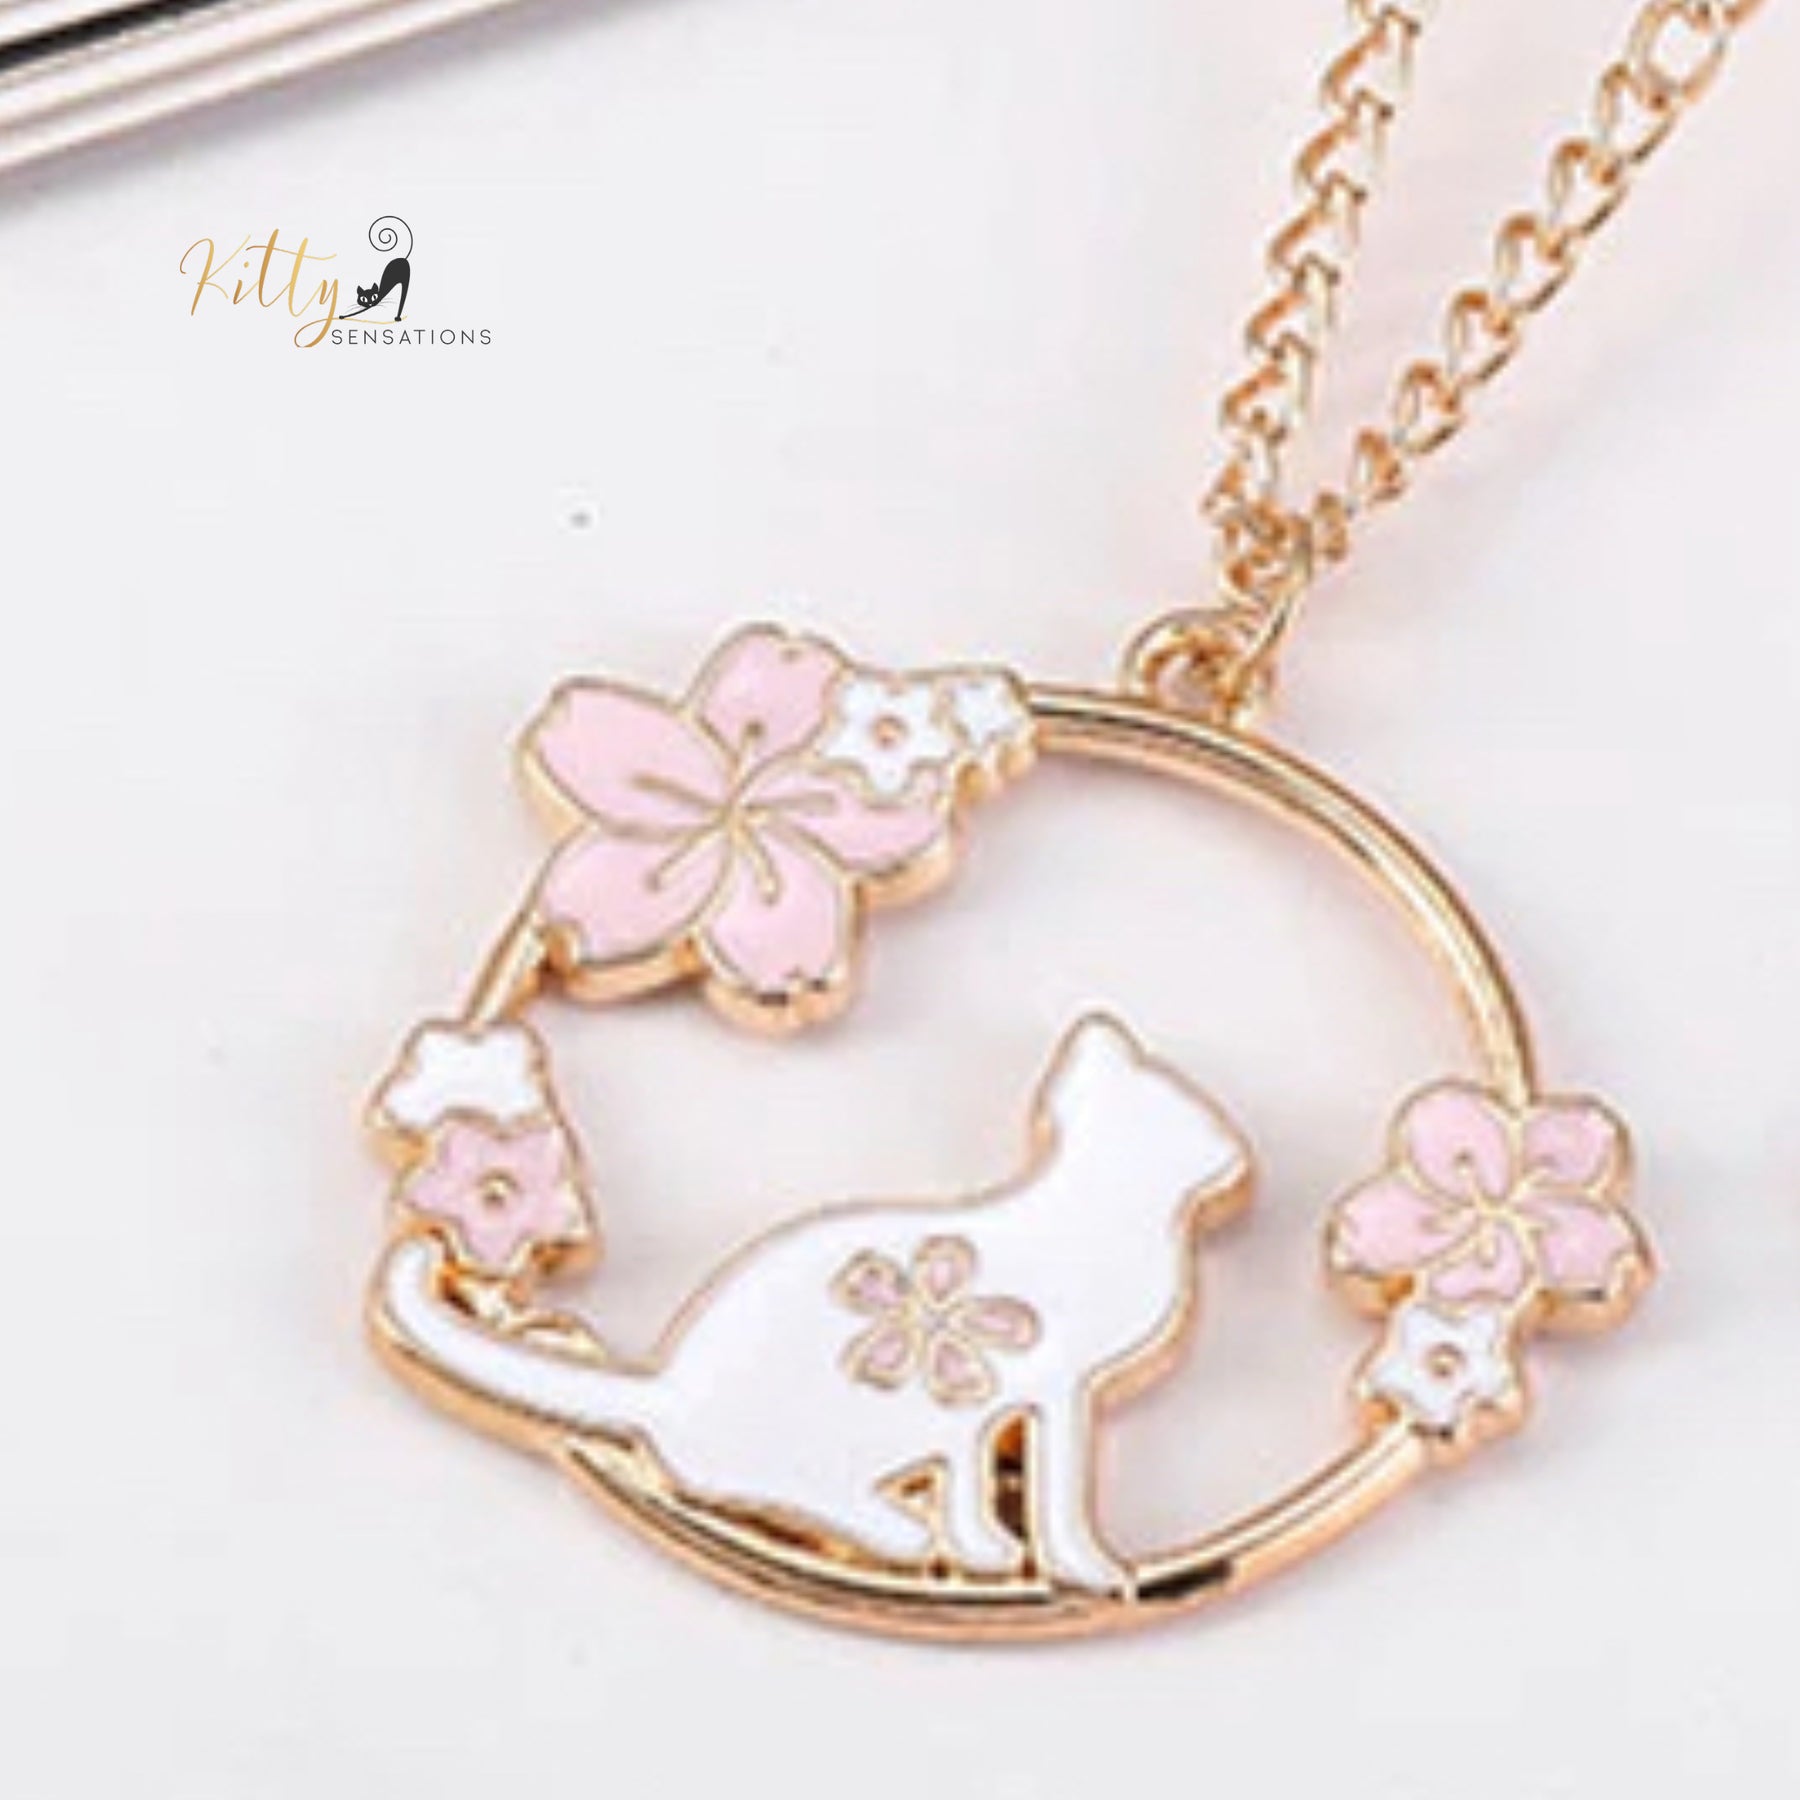 www.KittySensations.com: Jasmines and Orchids Cat Necklace - Enameled - Adjustable Length ($22.30): https://www.kittysensations.com/products/jasmines-and-orchids-cat-pendant-necklace-enameled